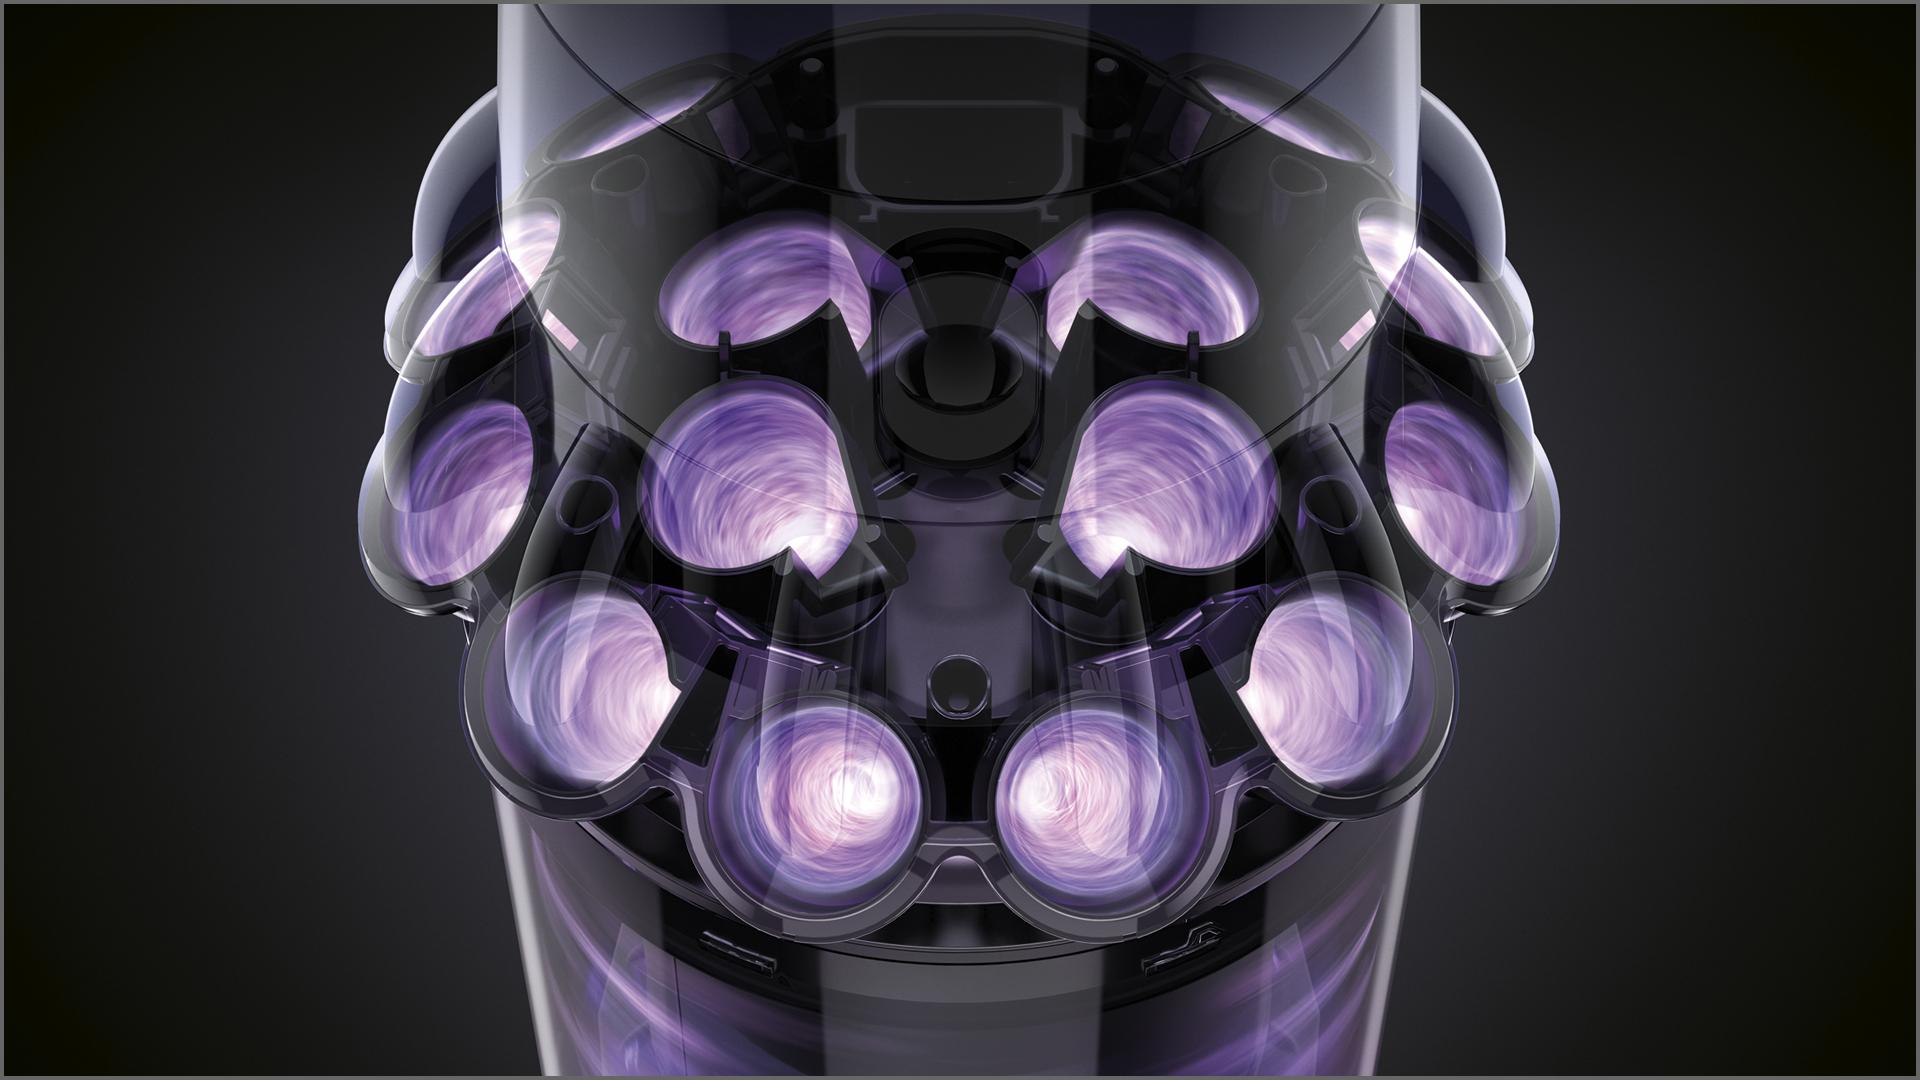 The technology behind the Dyson V11™ vacuum